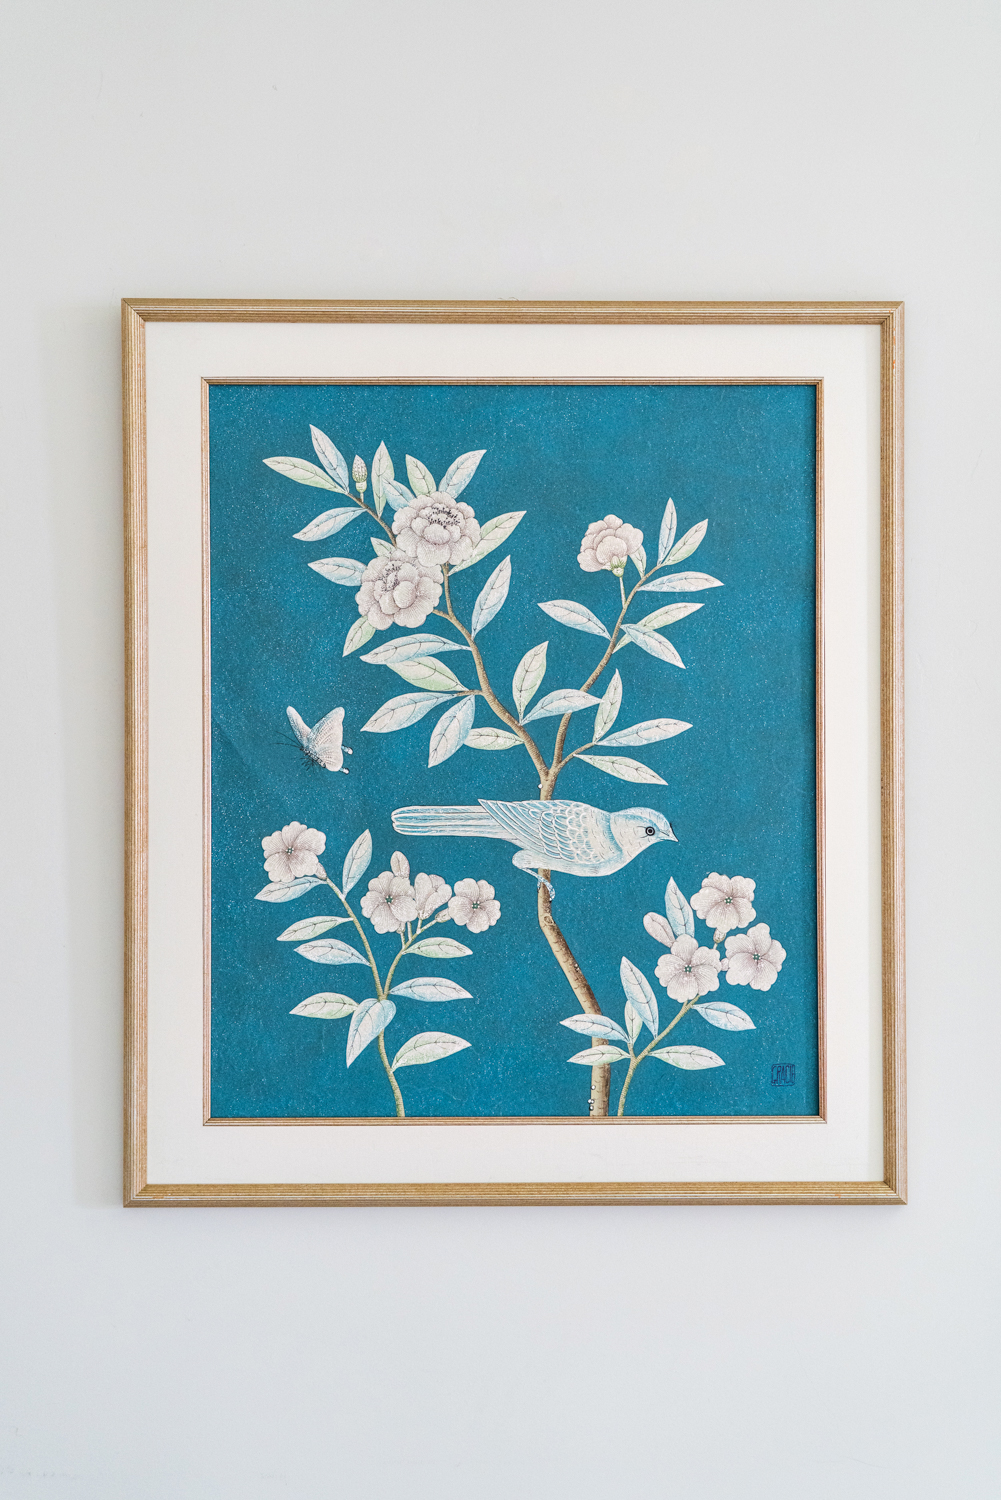 Framed scene floral with bird resting on a branch hand-painted against ocean blue